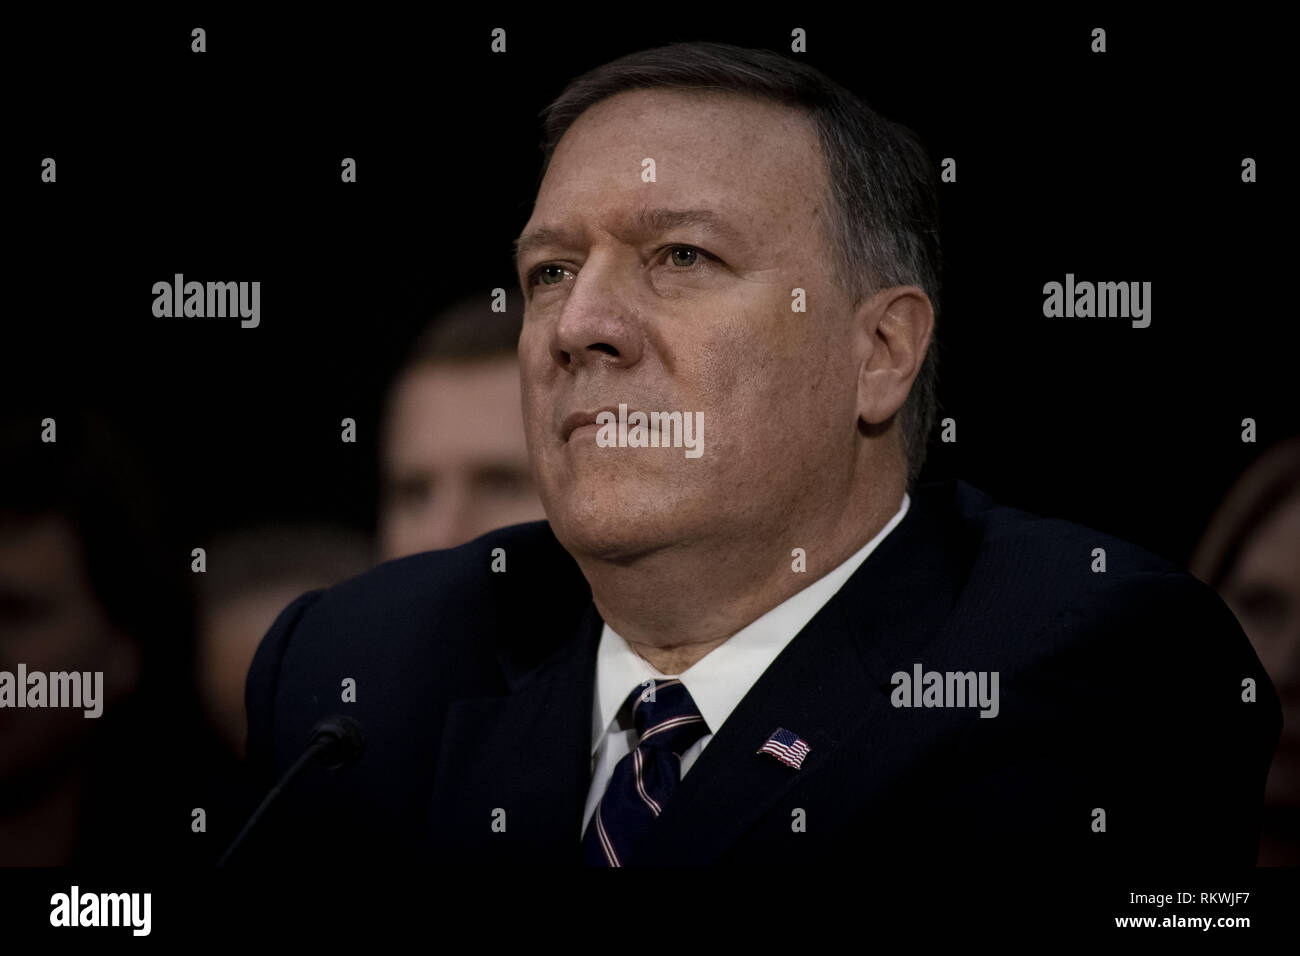 January 12, 2017 - Washington, District of Columbia, United States - Representative MIKE POMPEO at his confirmation hearing to become CIA Director, January 12, 2017 (Credit Image: © Douglas Christian/ZUMA Wire) Stock Photo